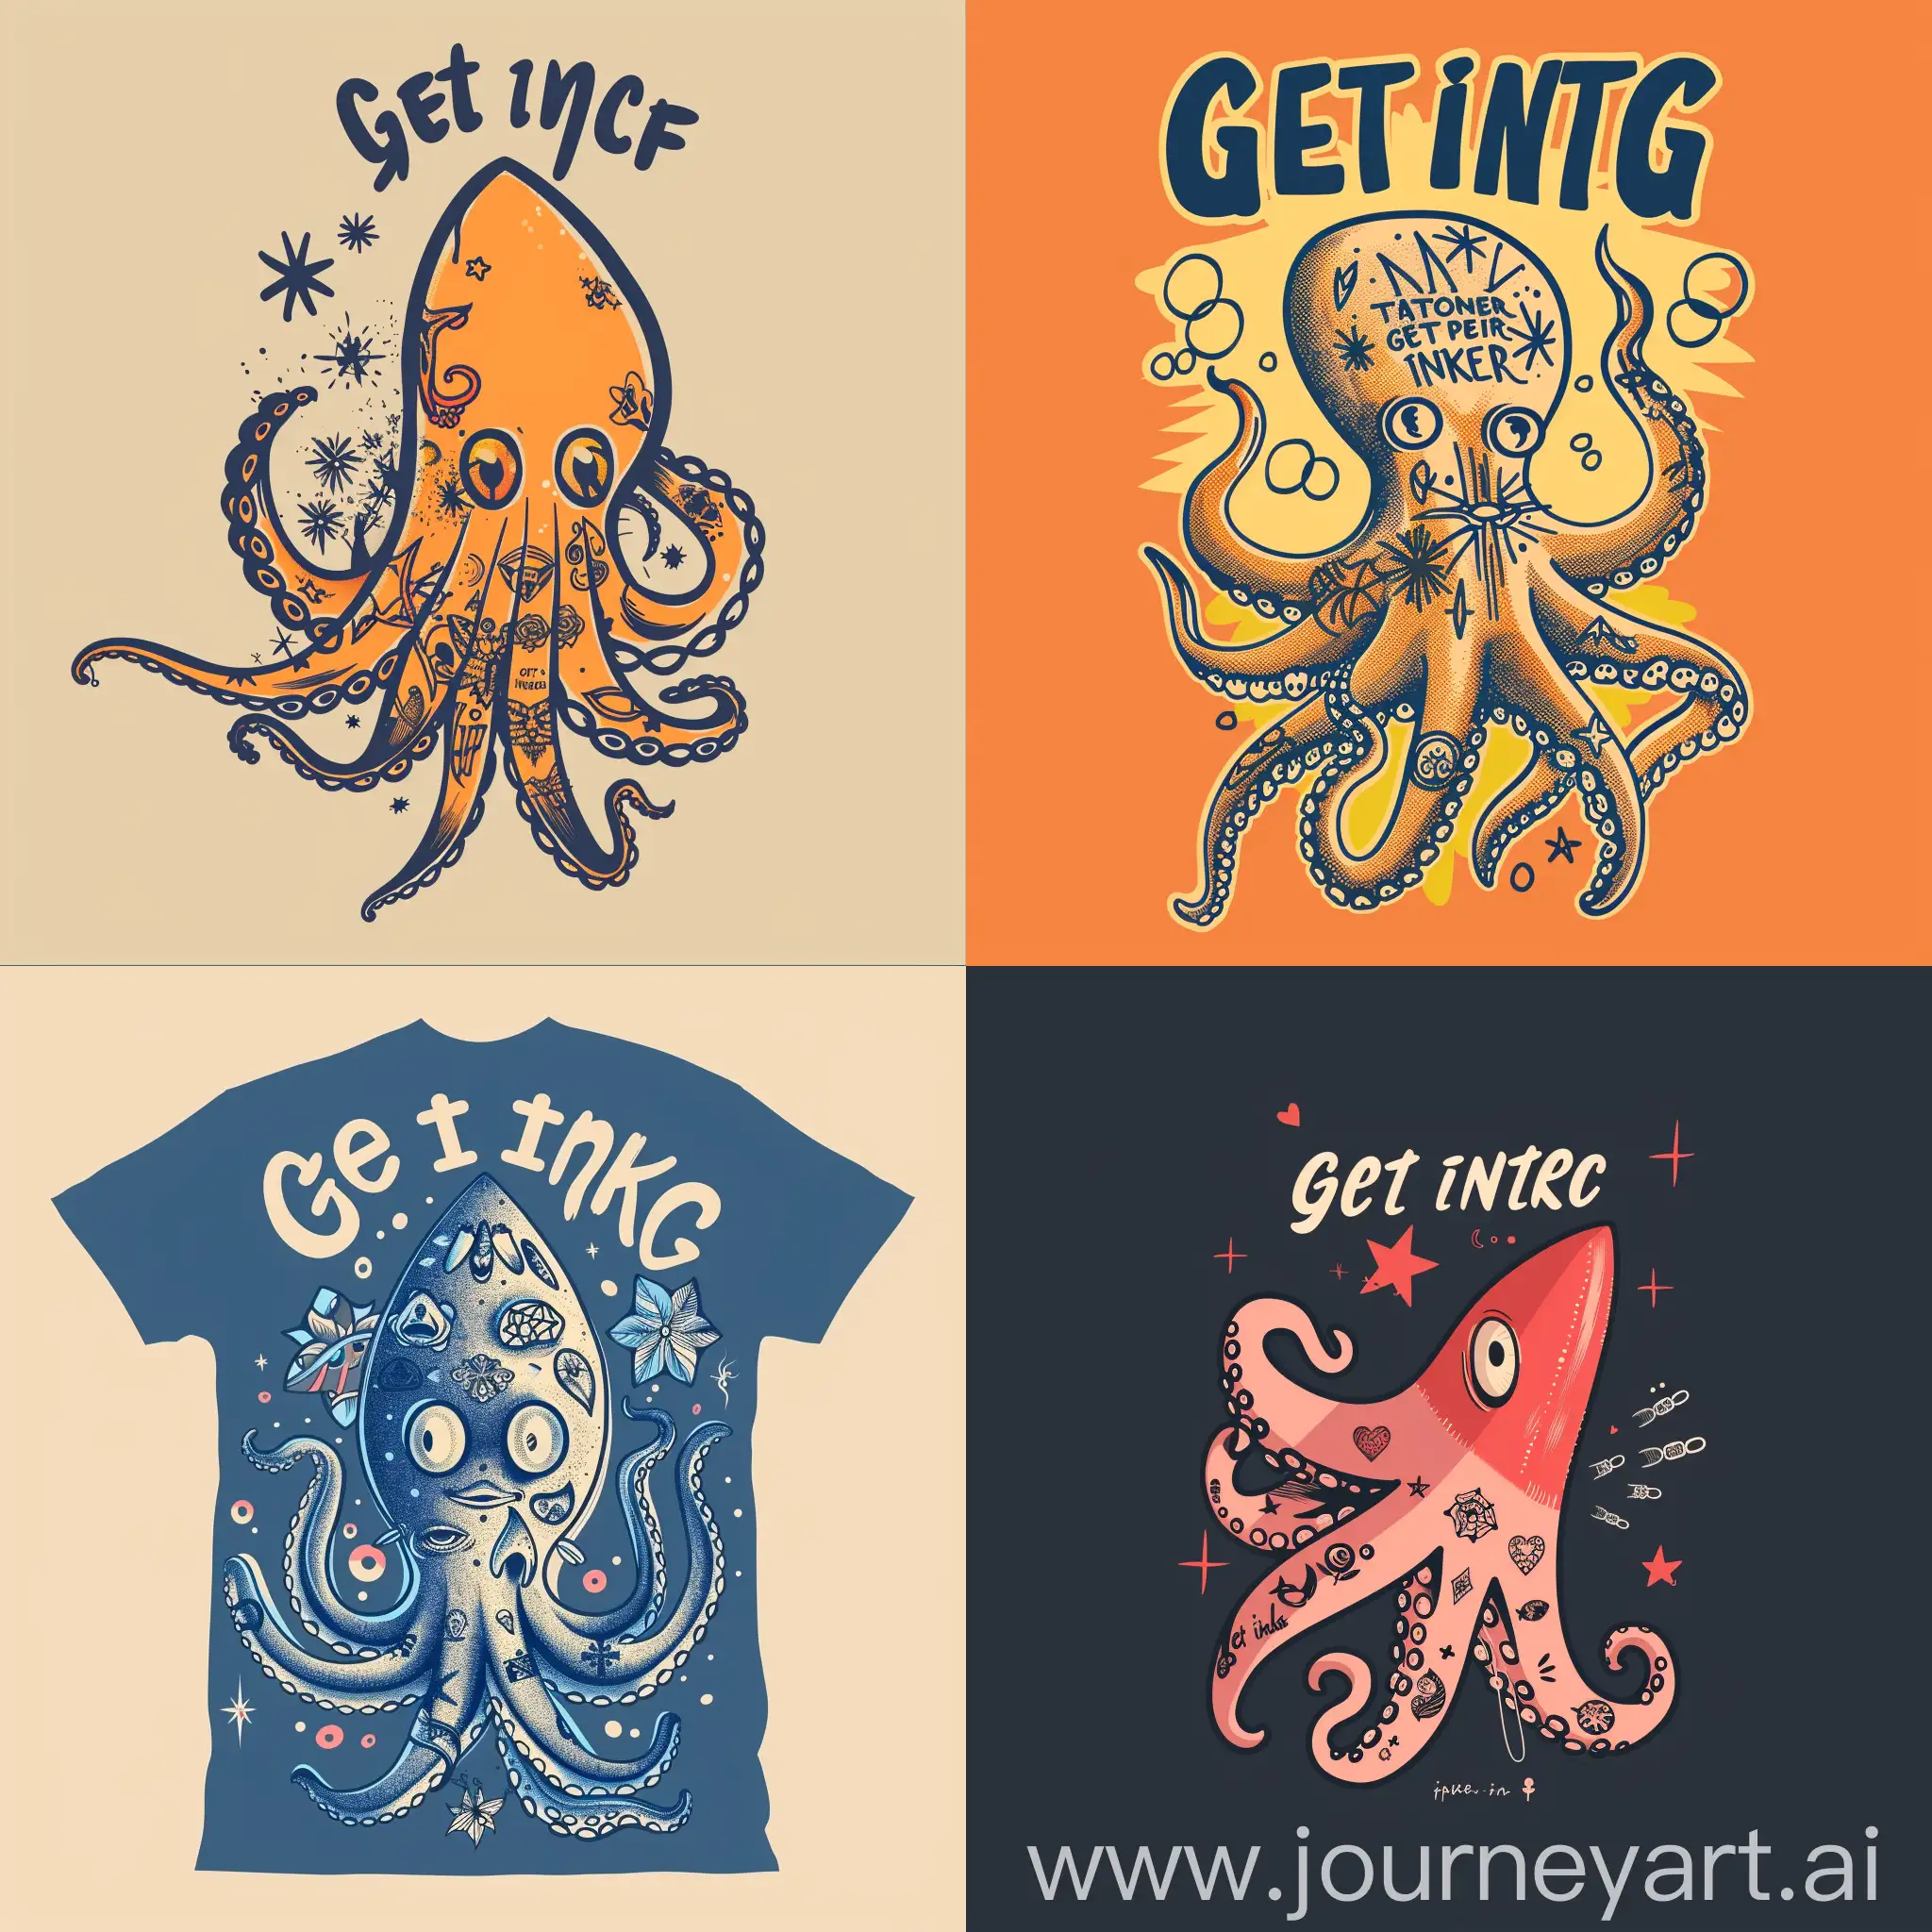 Tee shirt design a cute squid with tatoos and above the squid the words Get inked